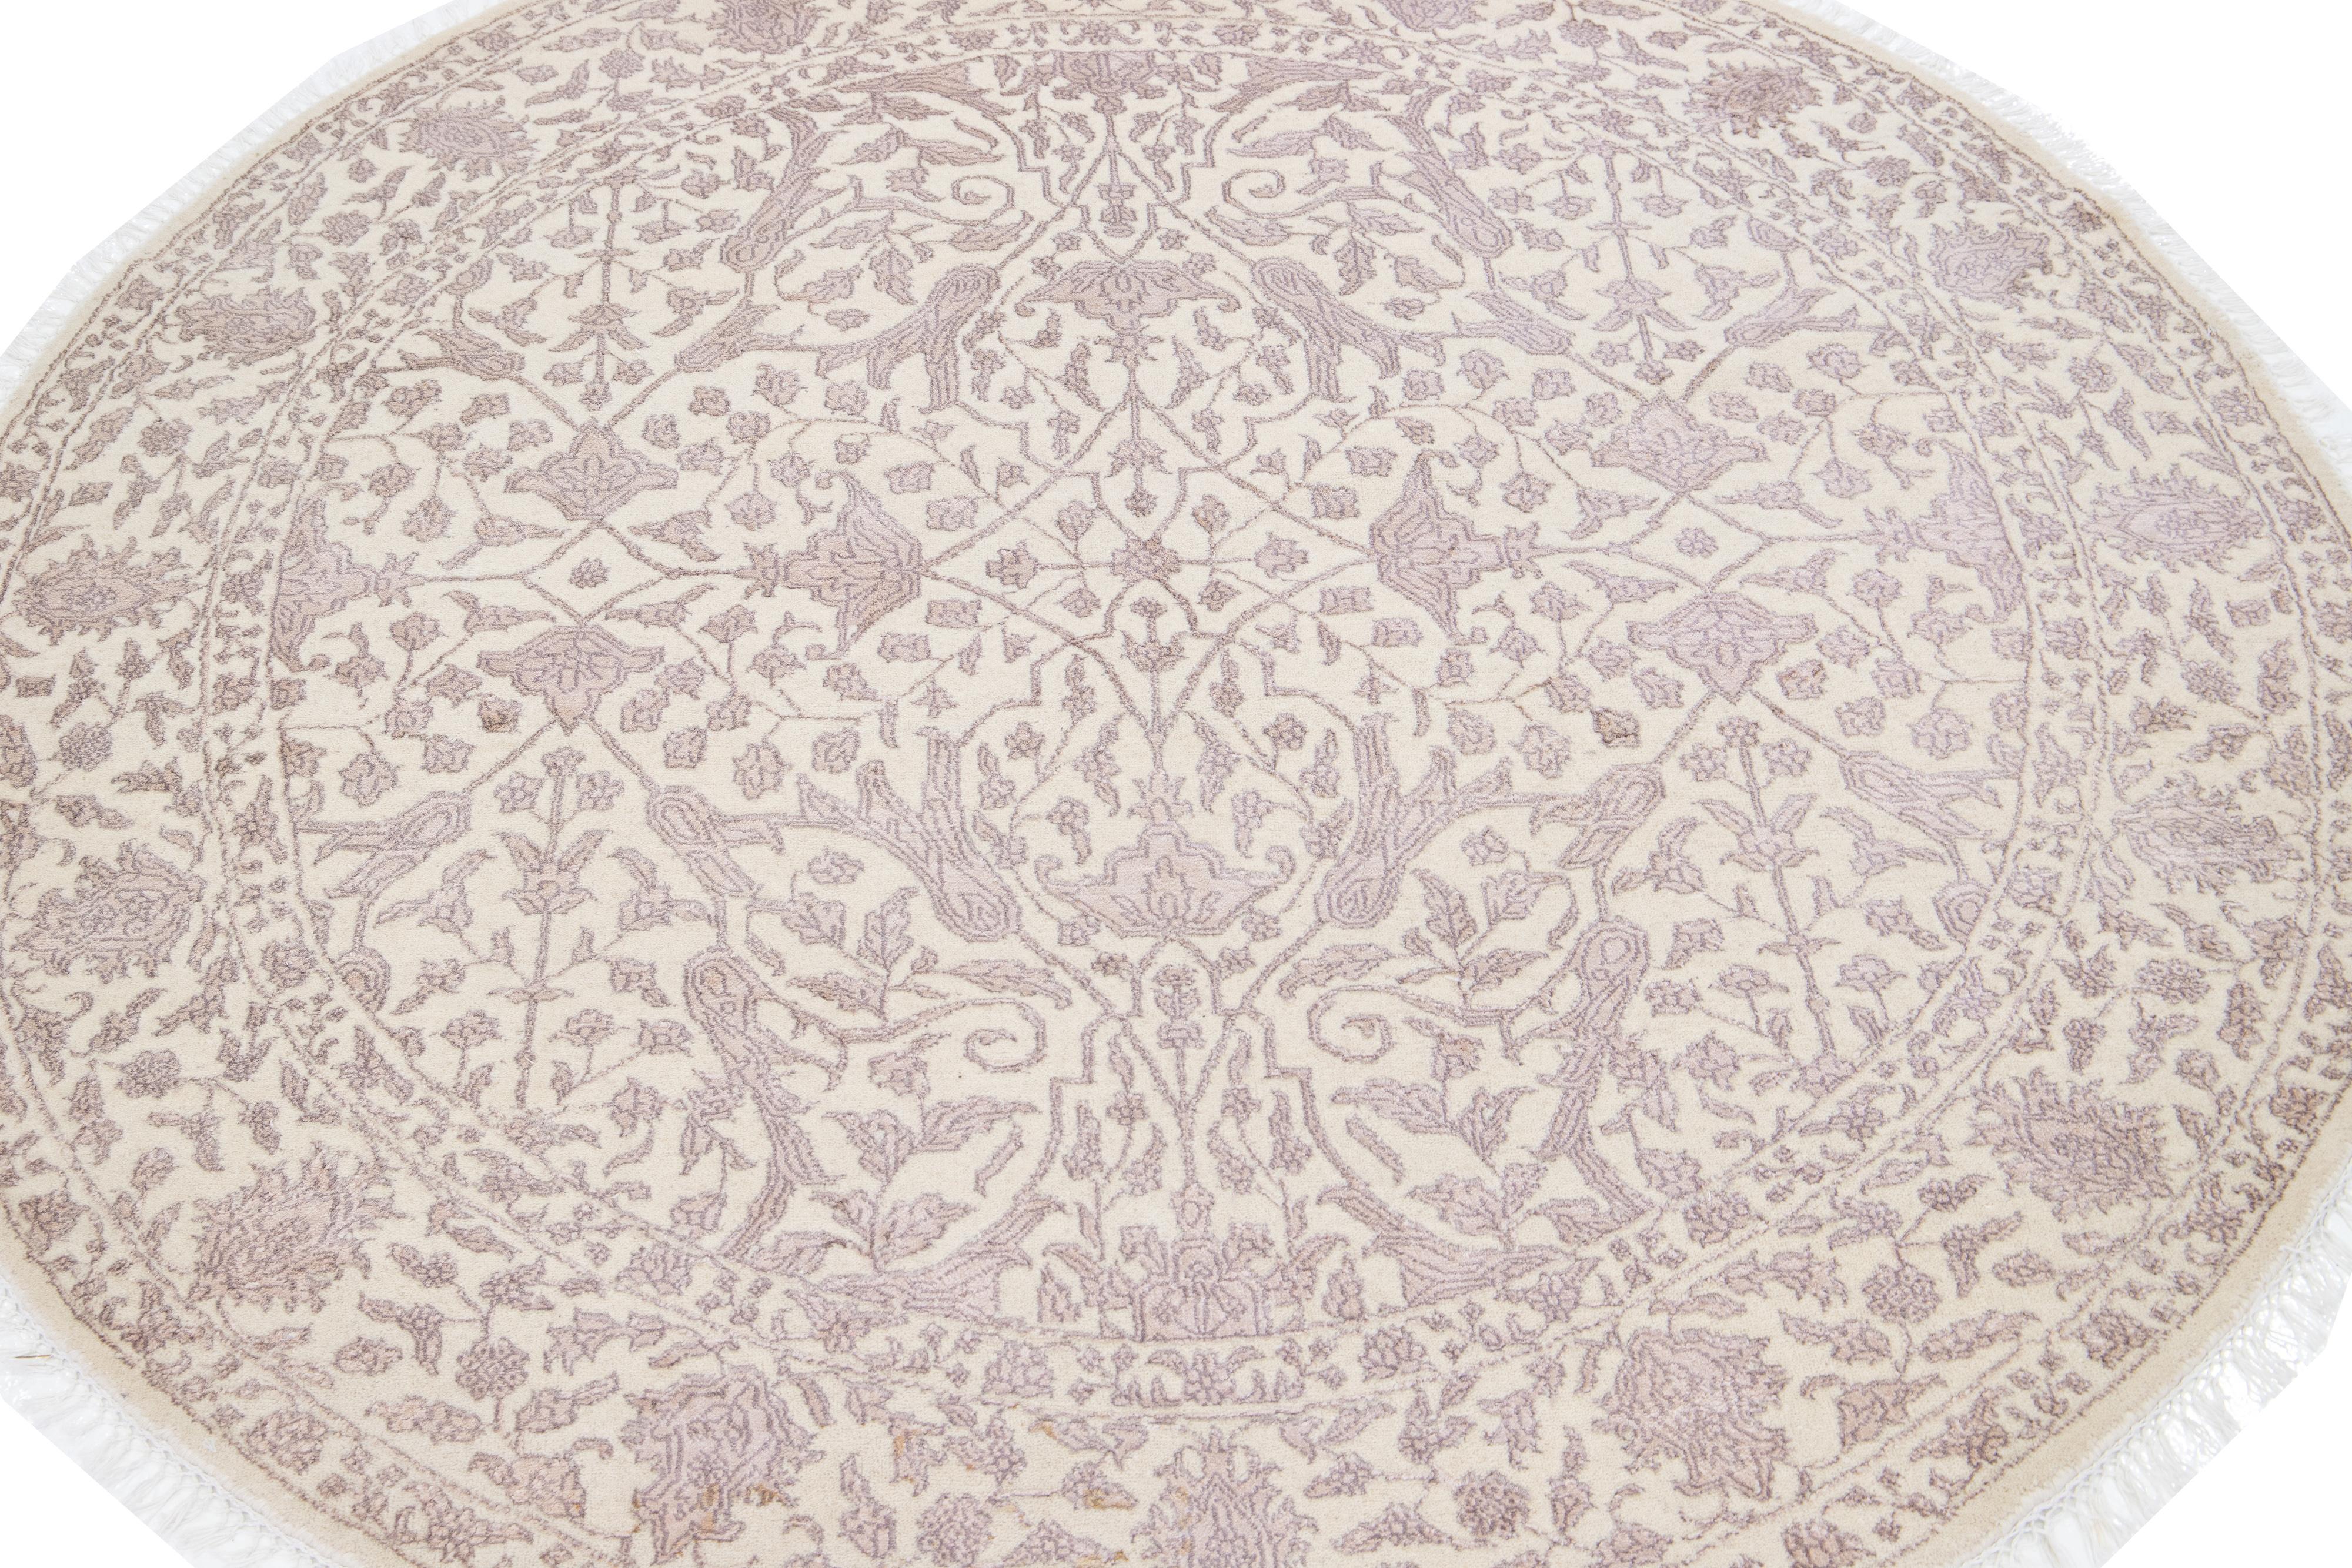 Beautiful Contemporary Indian hand-knotted wool and silk round rug with a beige field. This piece has rose accents in an all-over floral design with white fringes. 

This rug has a diameter of 6'1